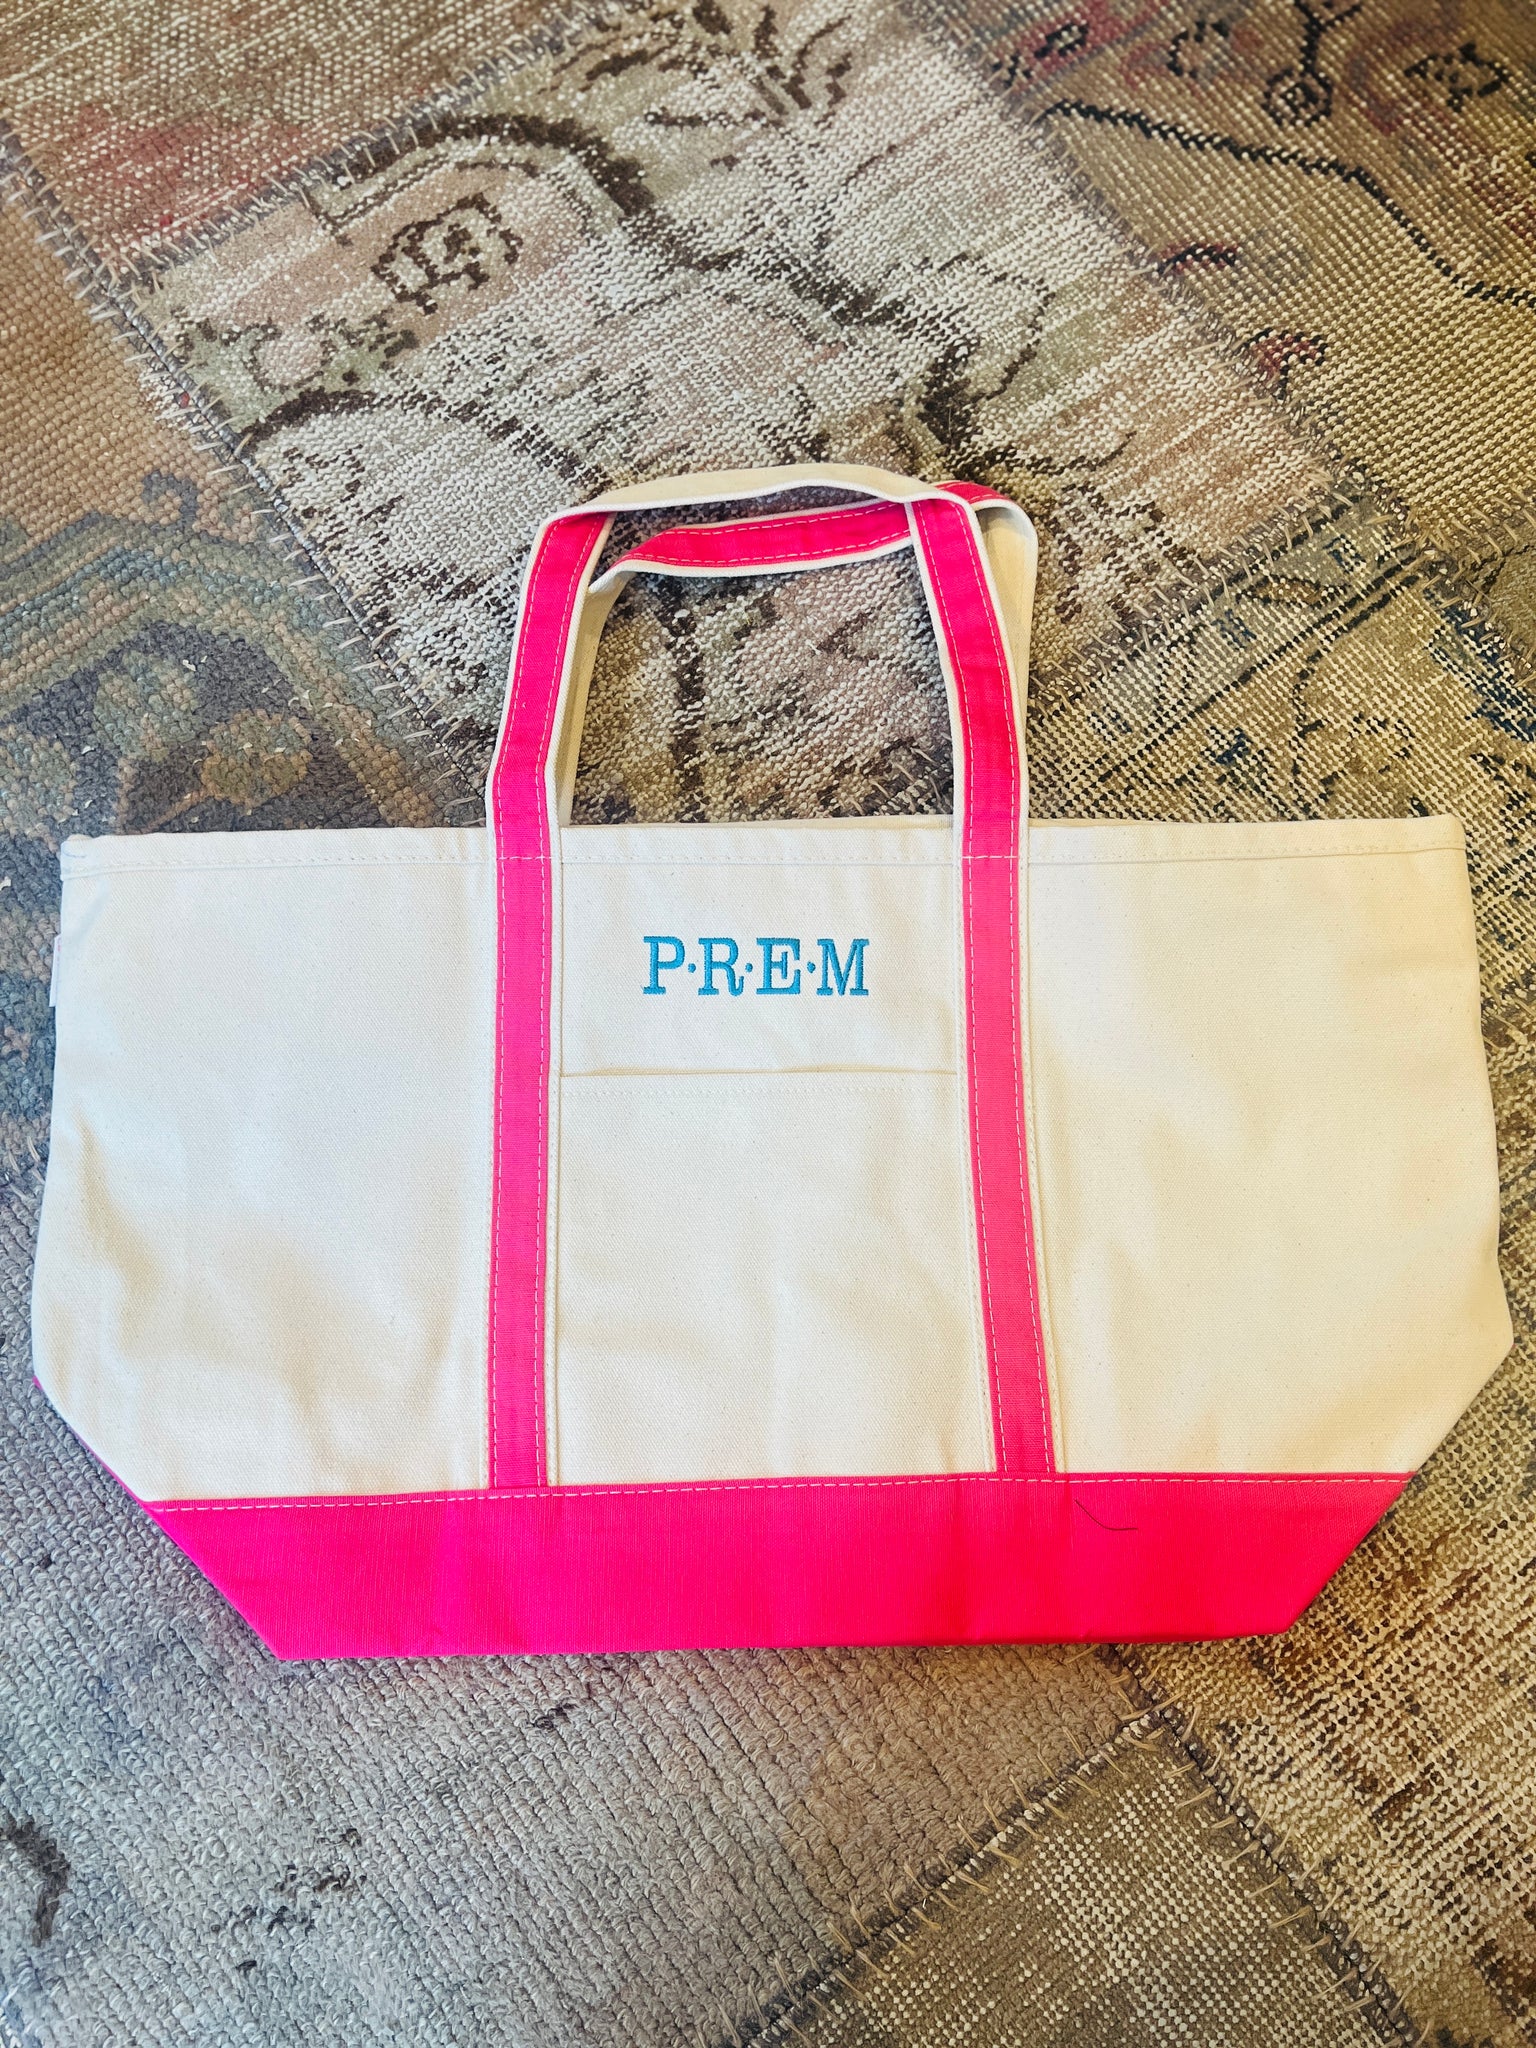 Personalized Monogram Large Canvas Tote boat Tote Similar to